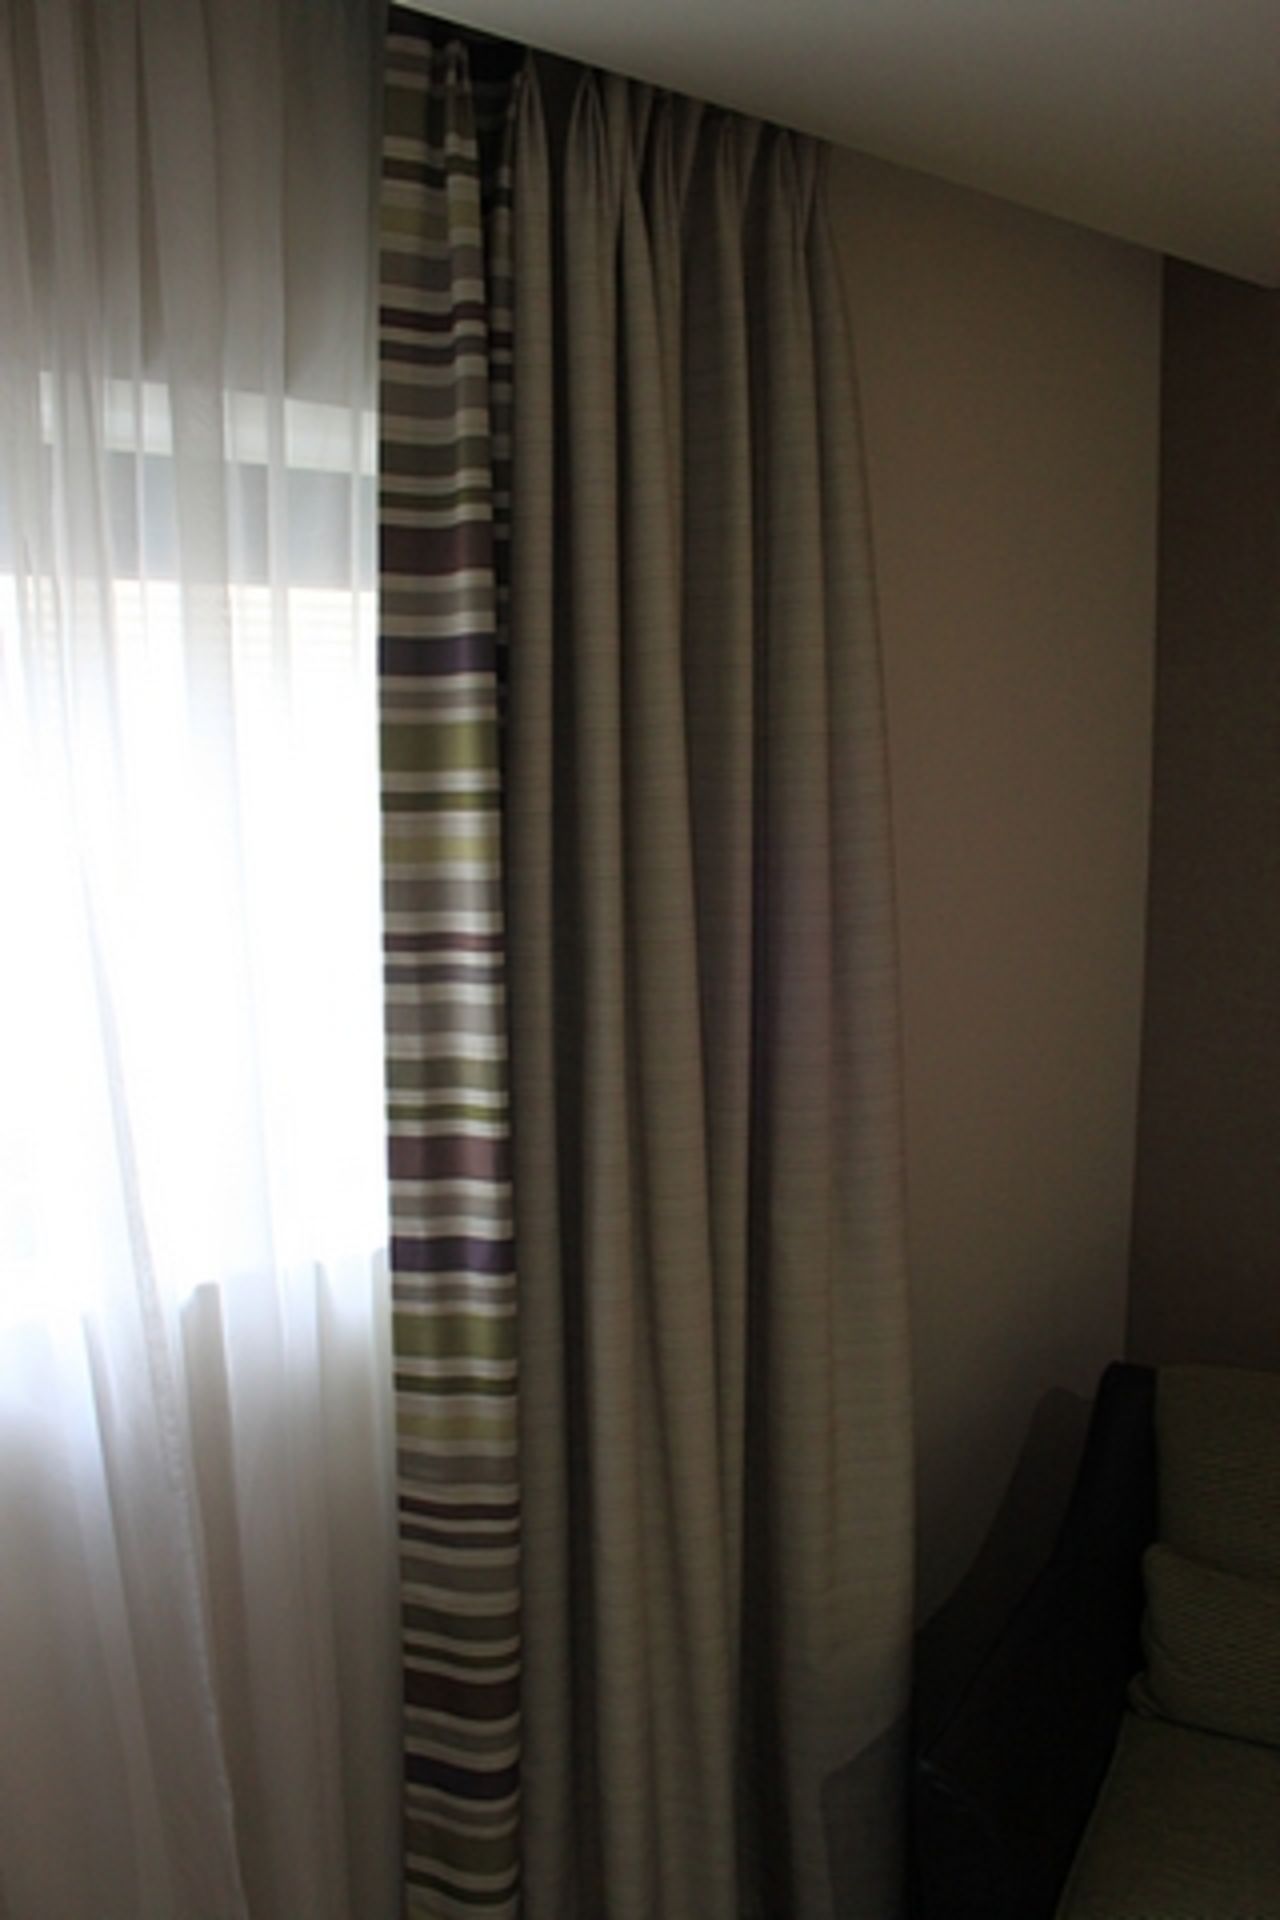 Sinclaire Fabrics a pair of drapes lined with blackout fabric spans 2000 x 2600mm (DB32AP1) - Image 3 of 5